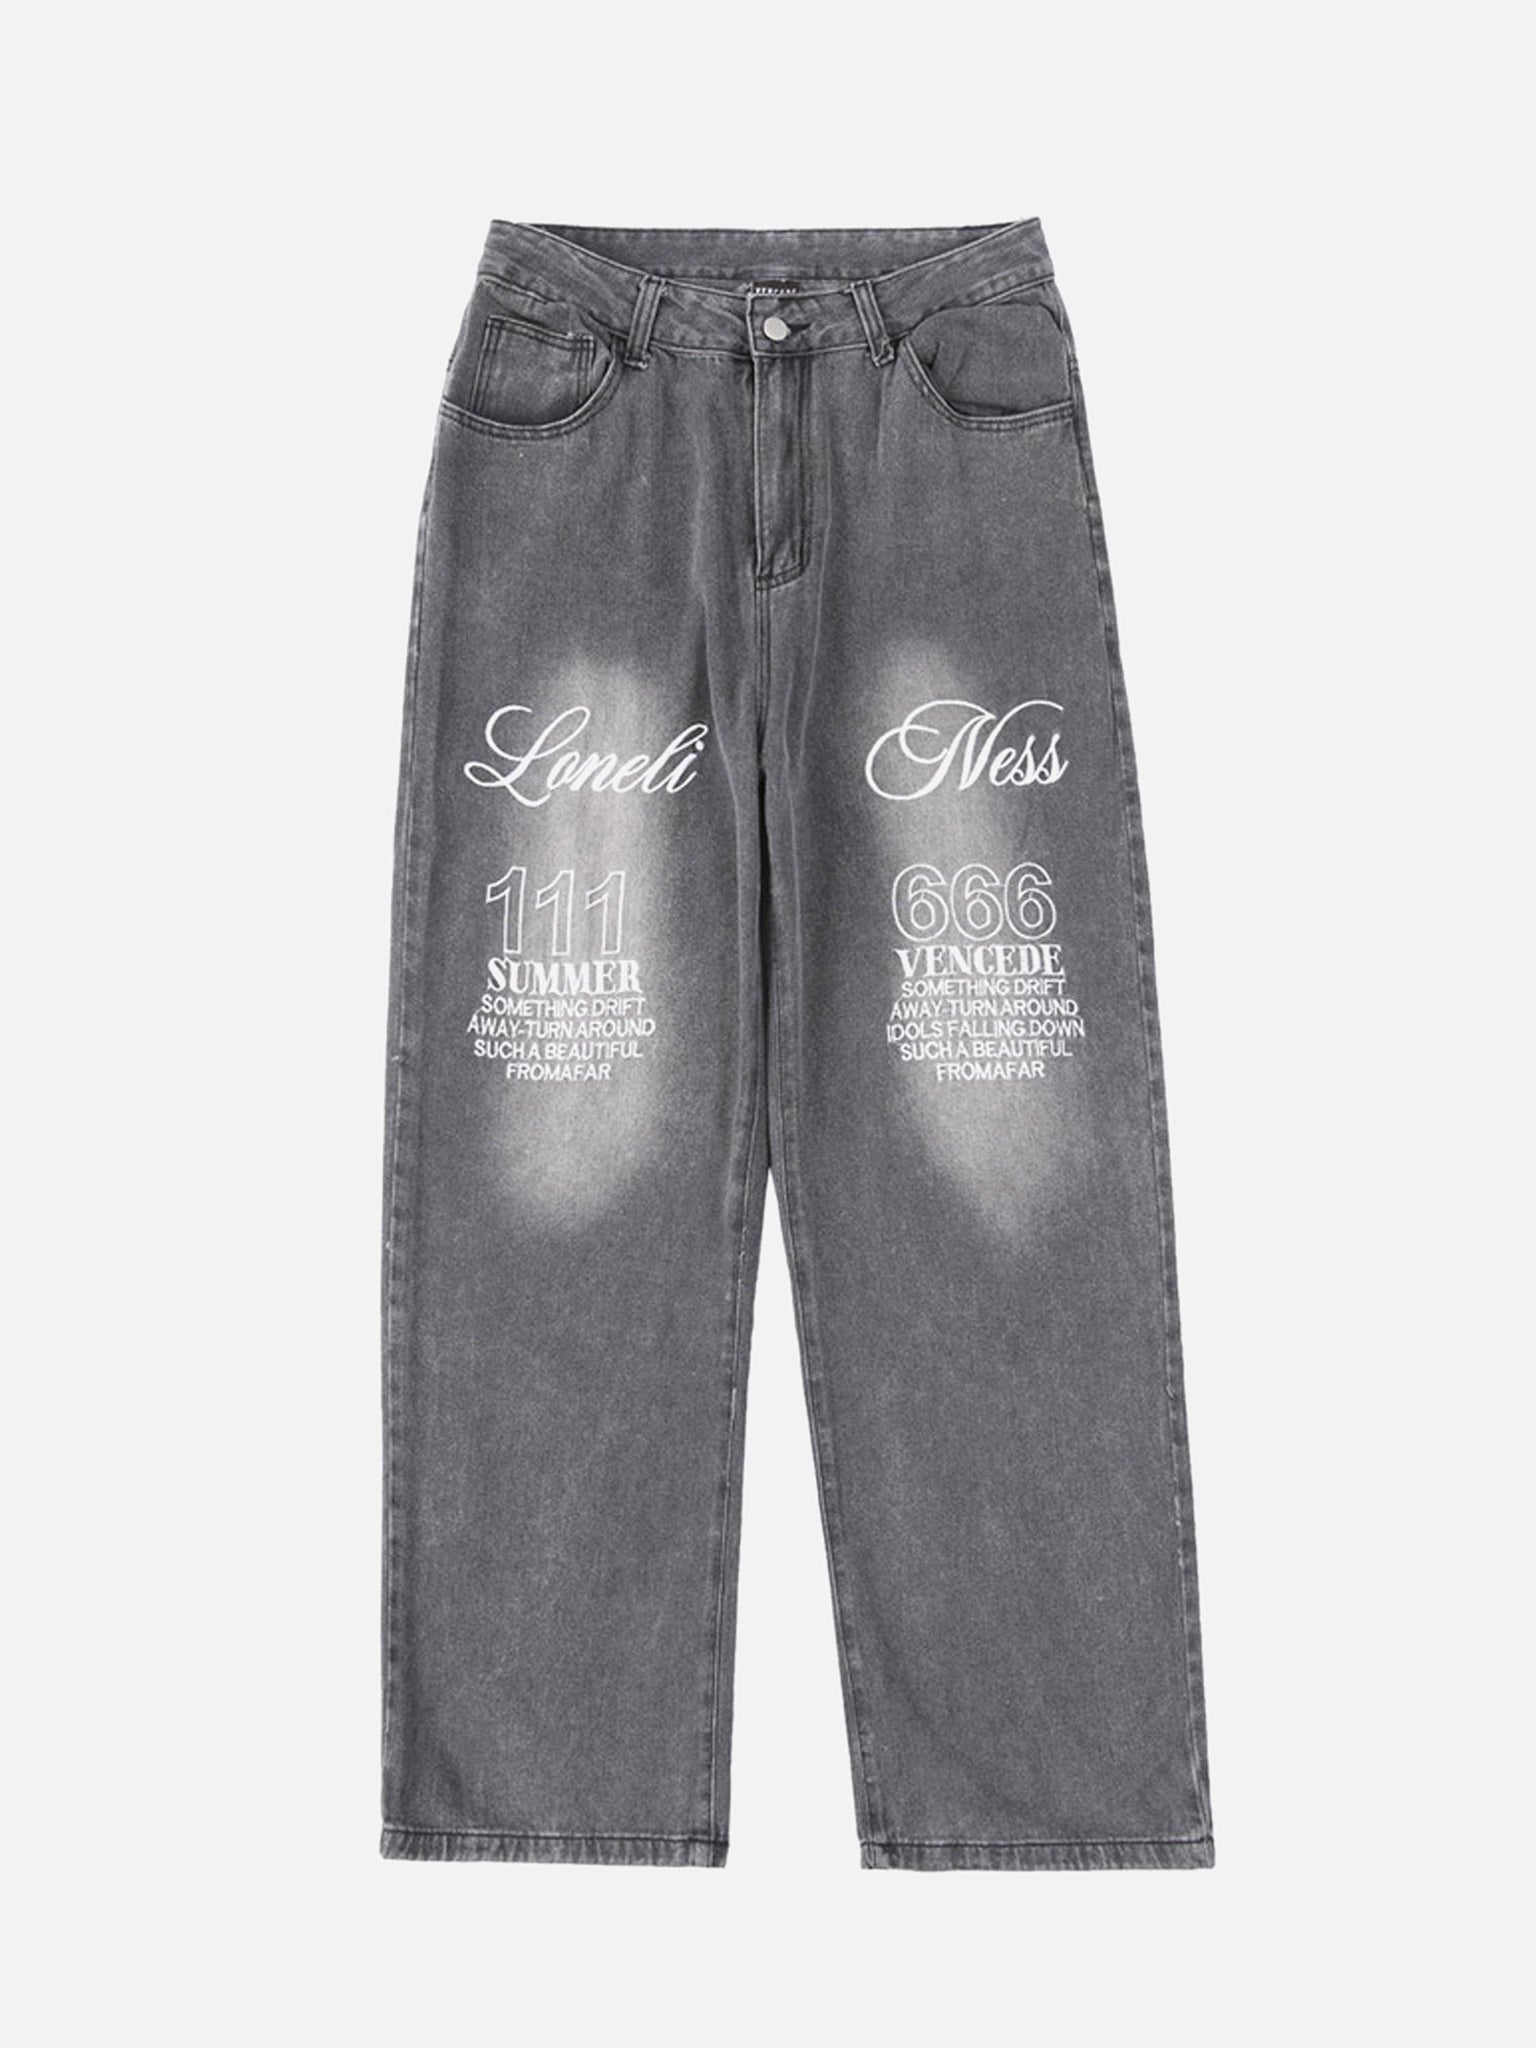 The Supermade American High Street Embroidered Letters Jeans Nine-quarter Pants